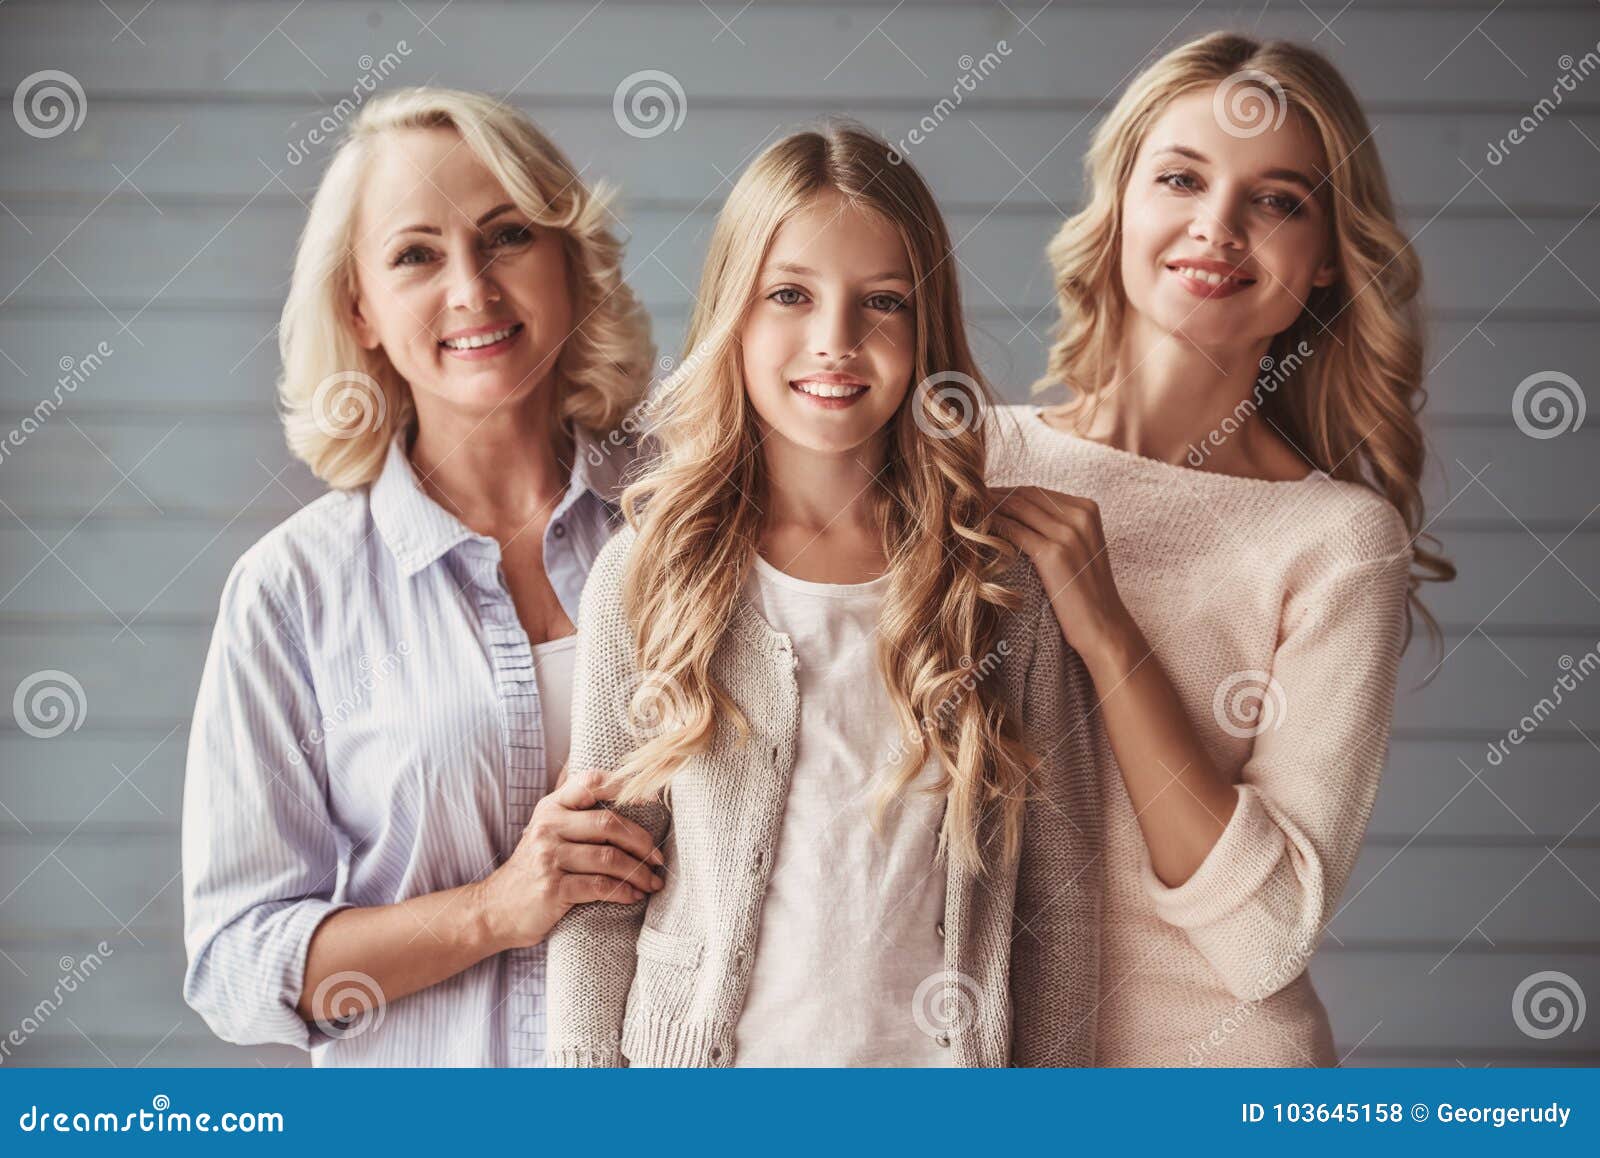 Granny Mom And Daughter Stock Photo Image Of Gray 103645158